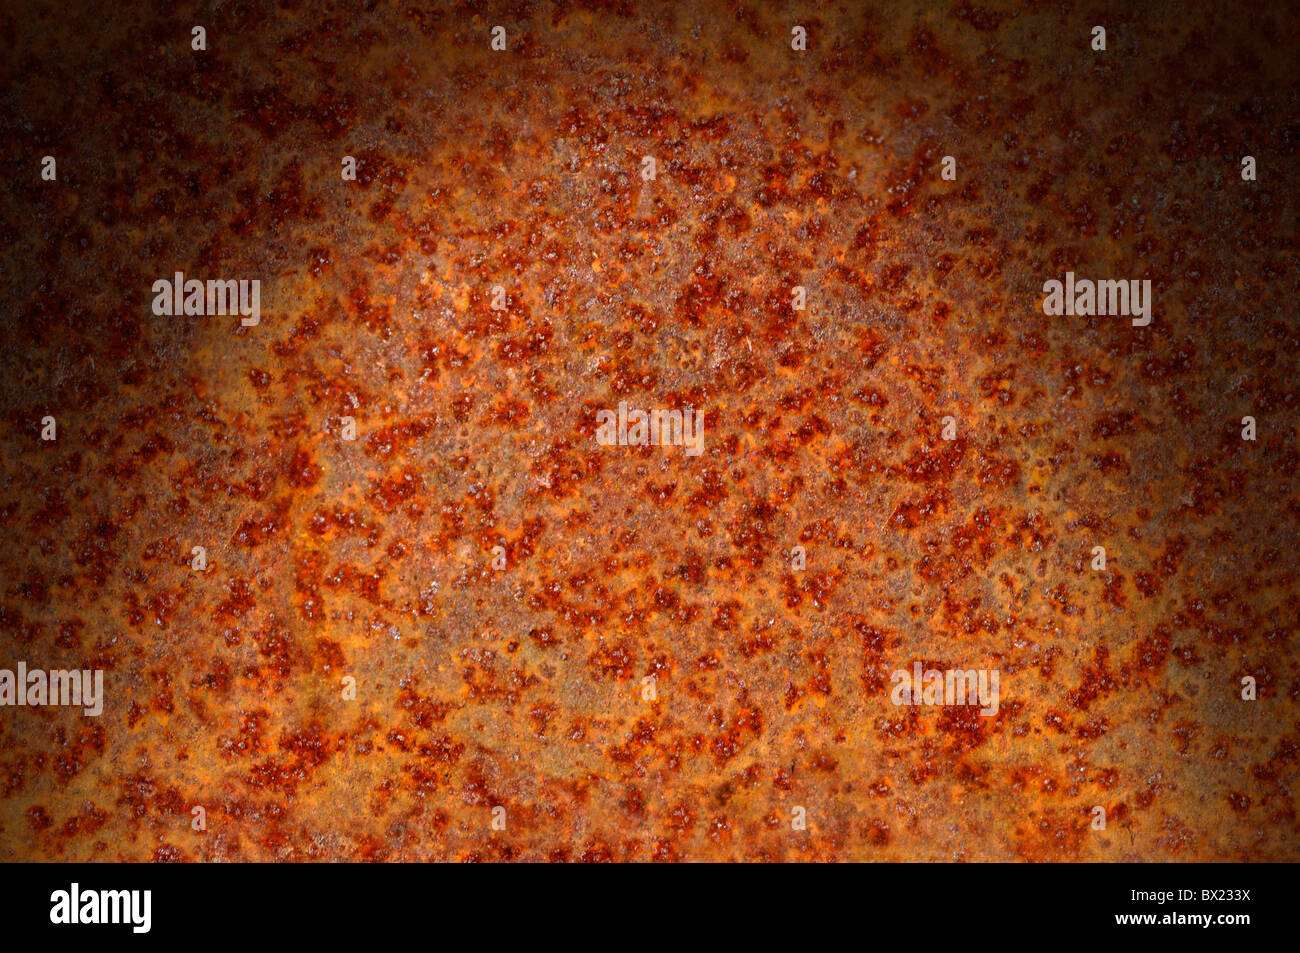 Rusted corroded metal surface dramatically lit from above. Horizontal. Stock Photo